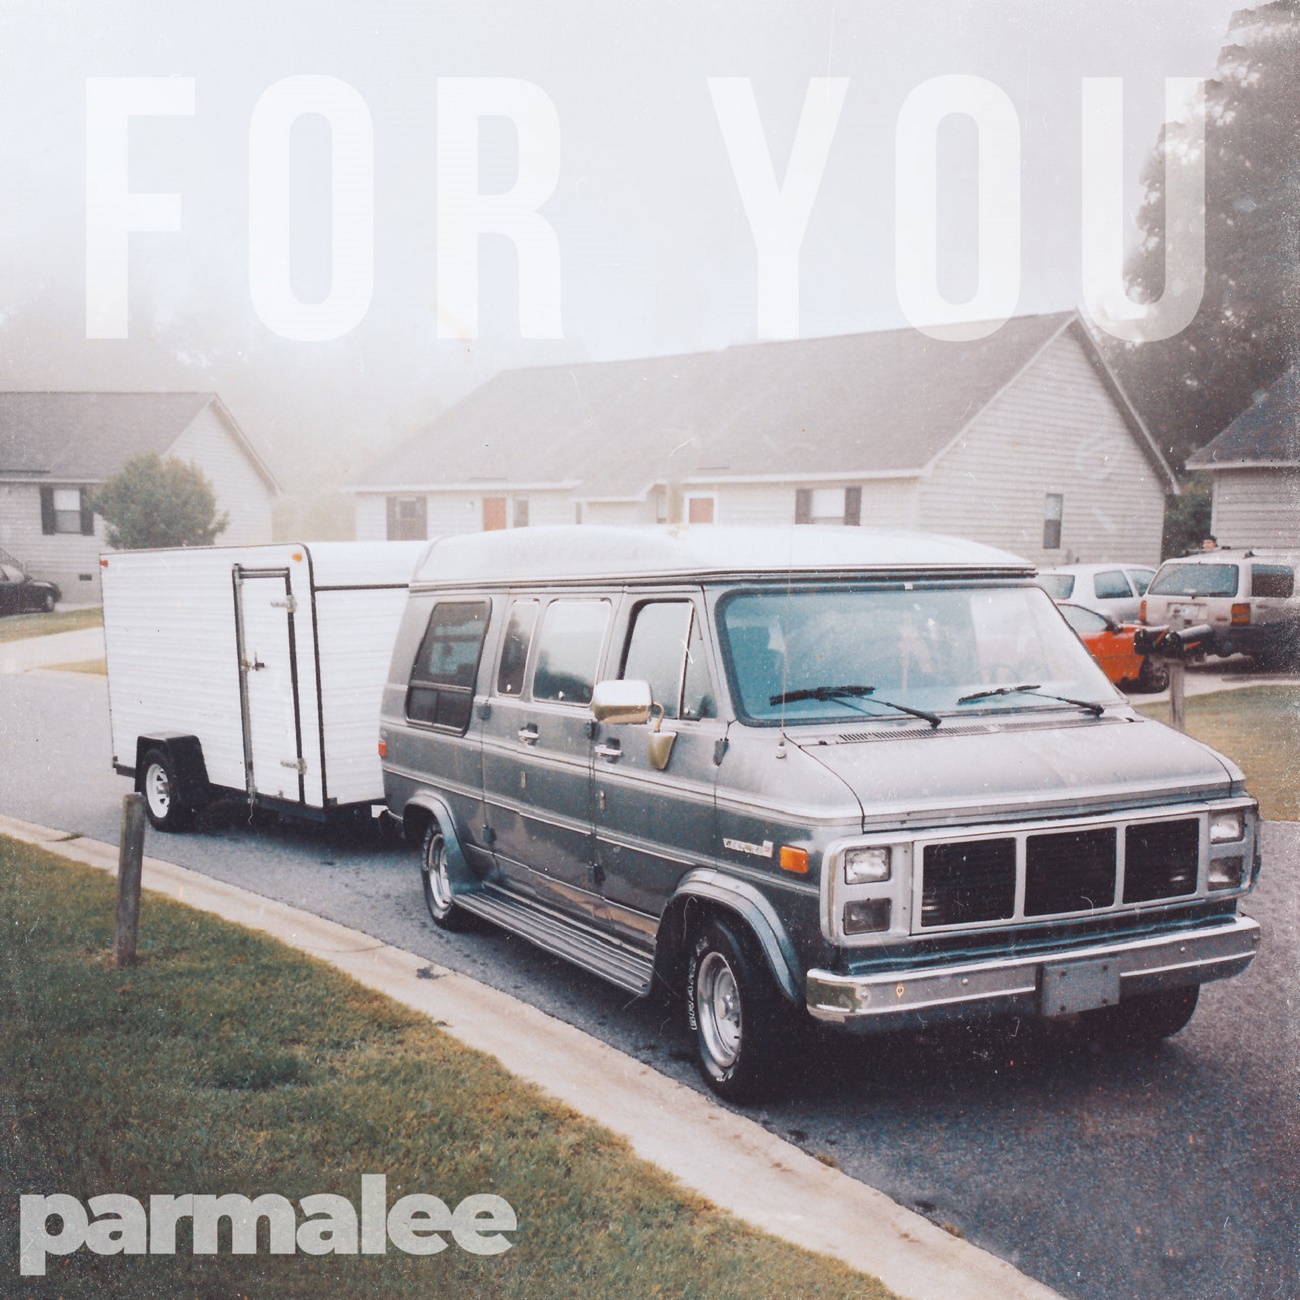 Art for Just The Way by Parmalee